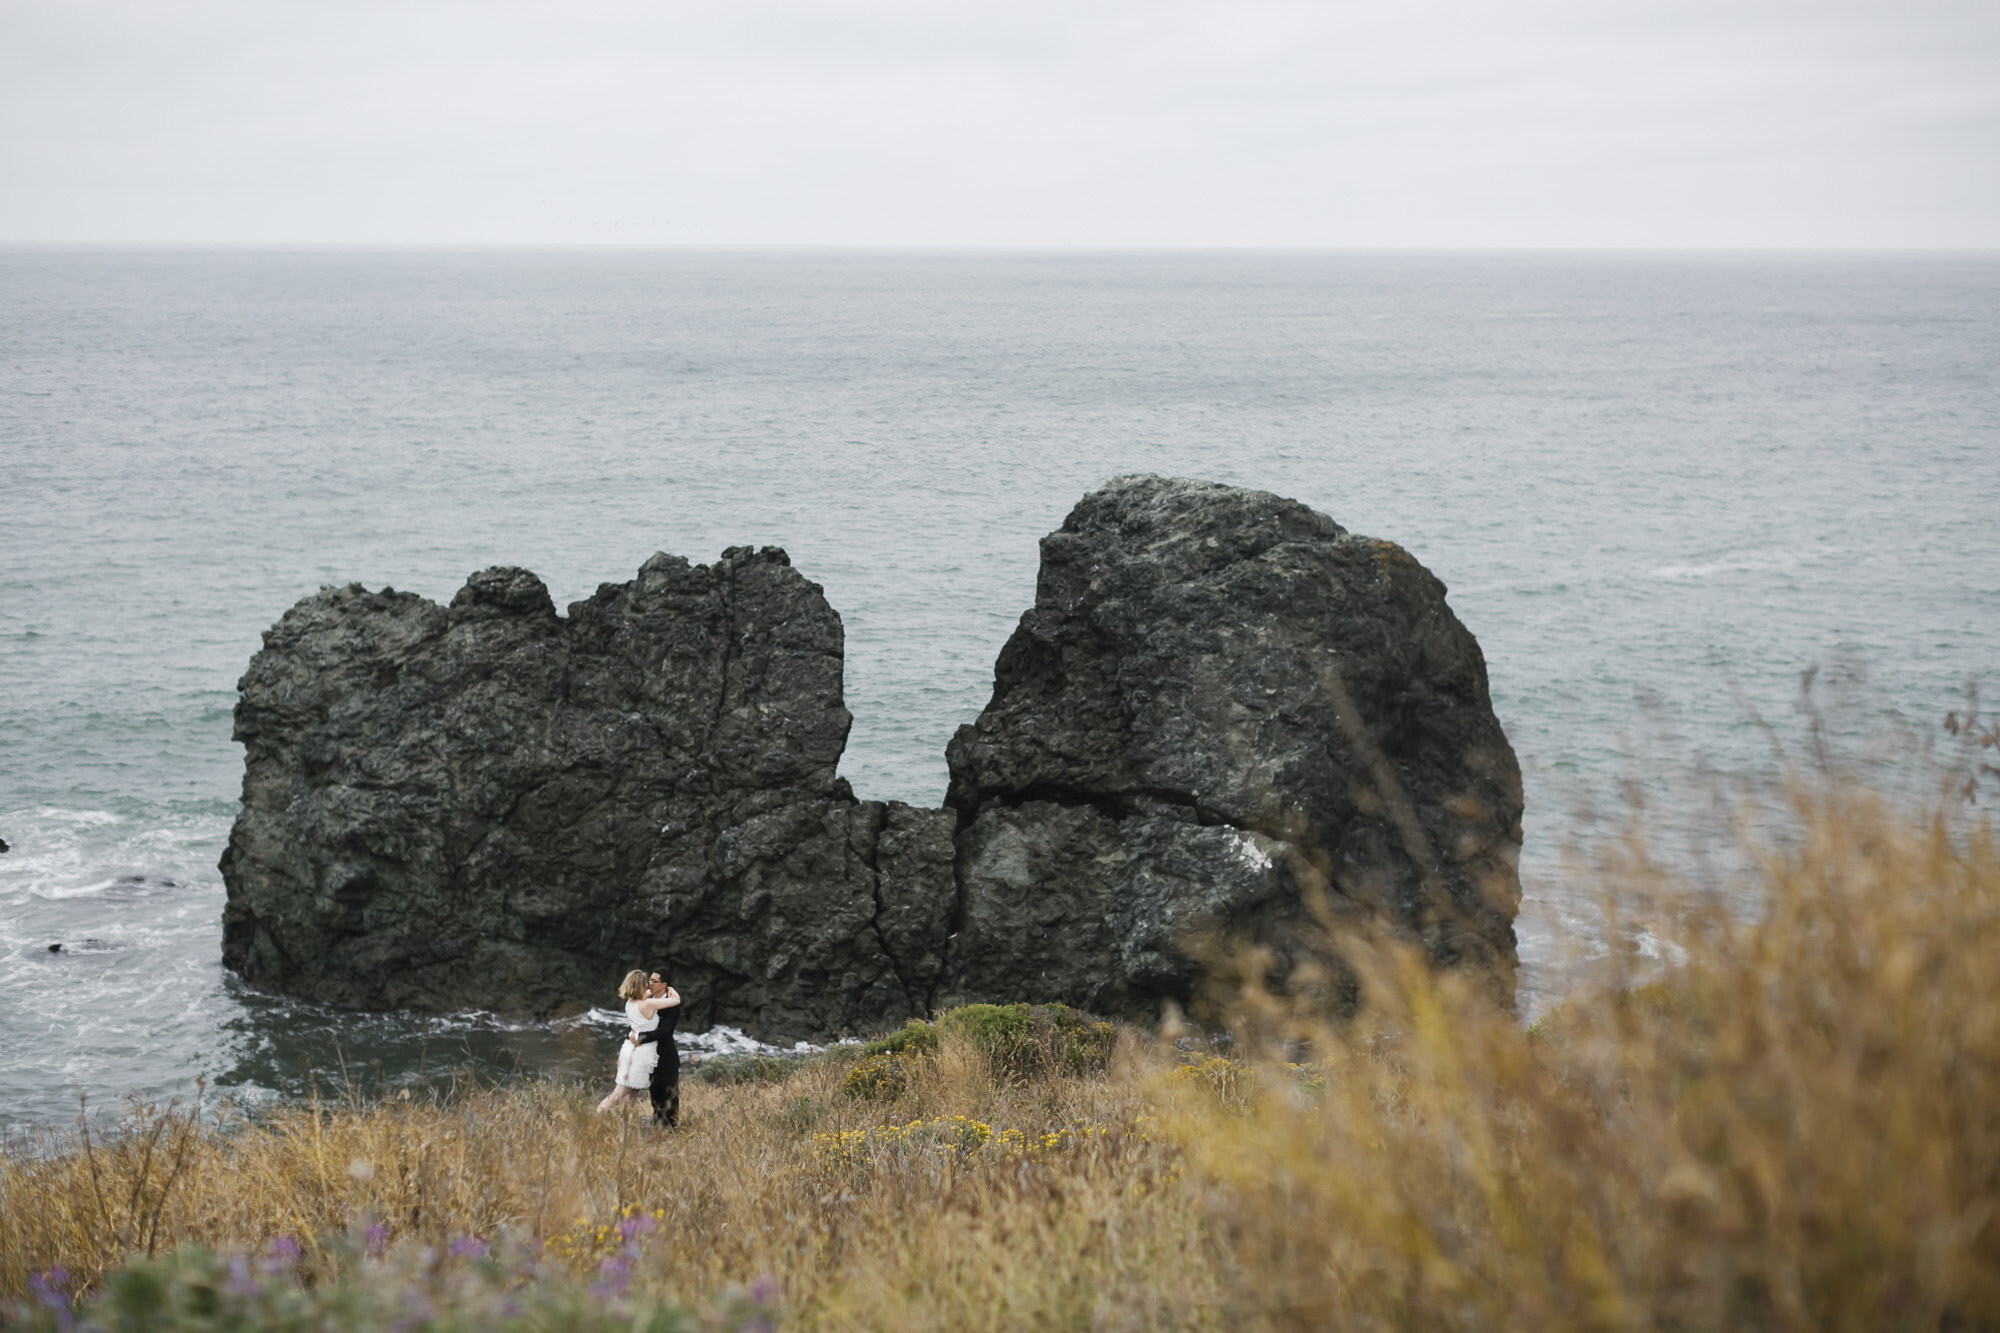 Married couple kiss in front of giant rock in the ocean along the California coast